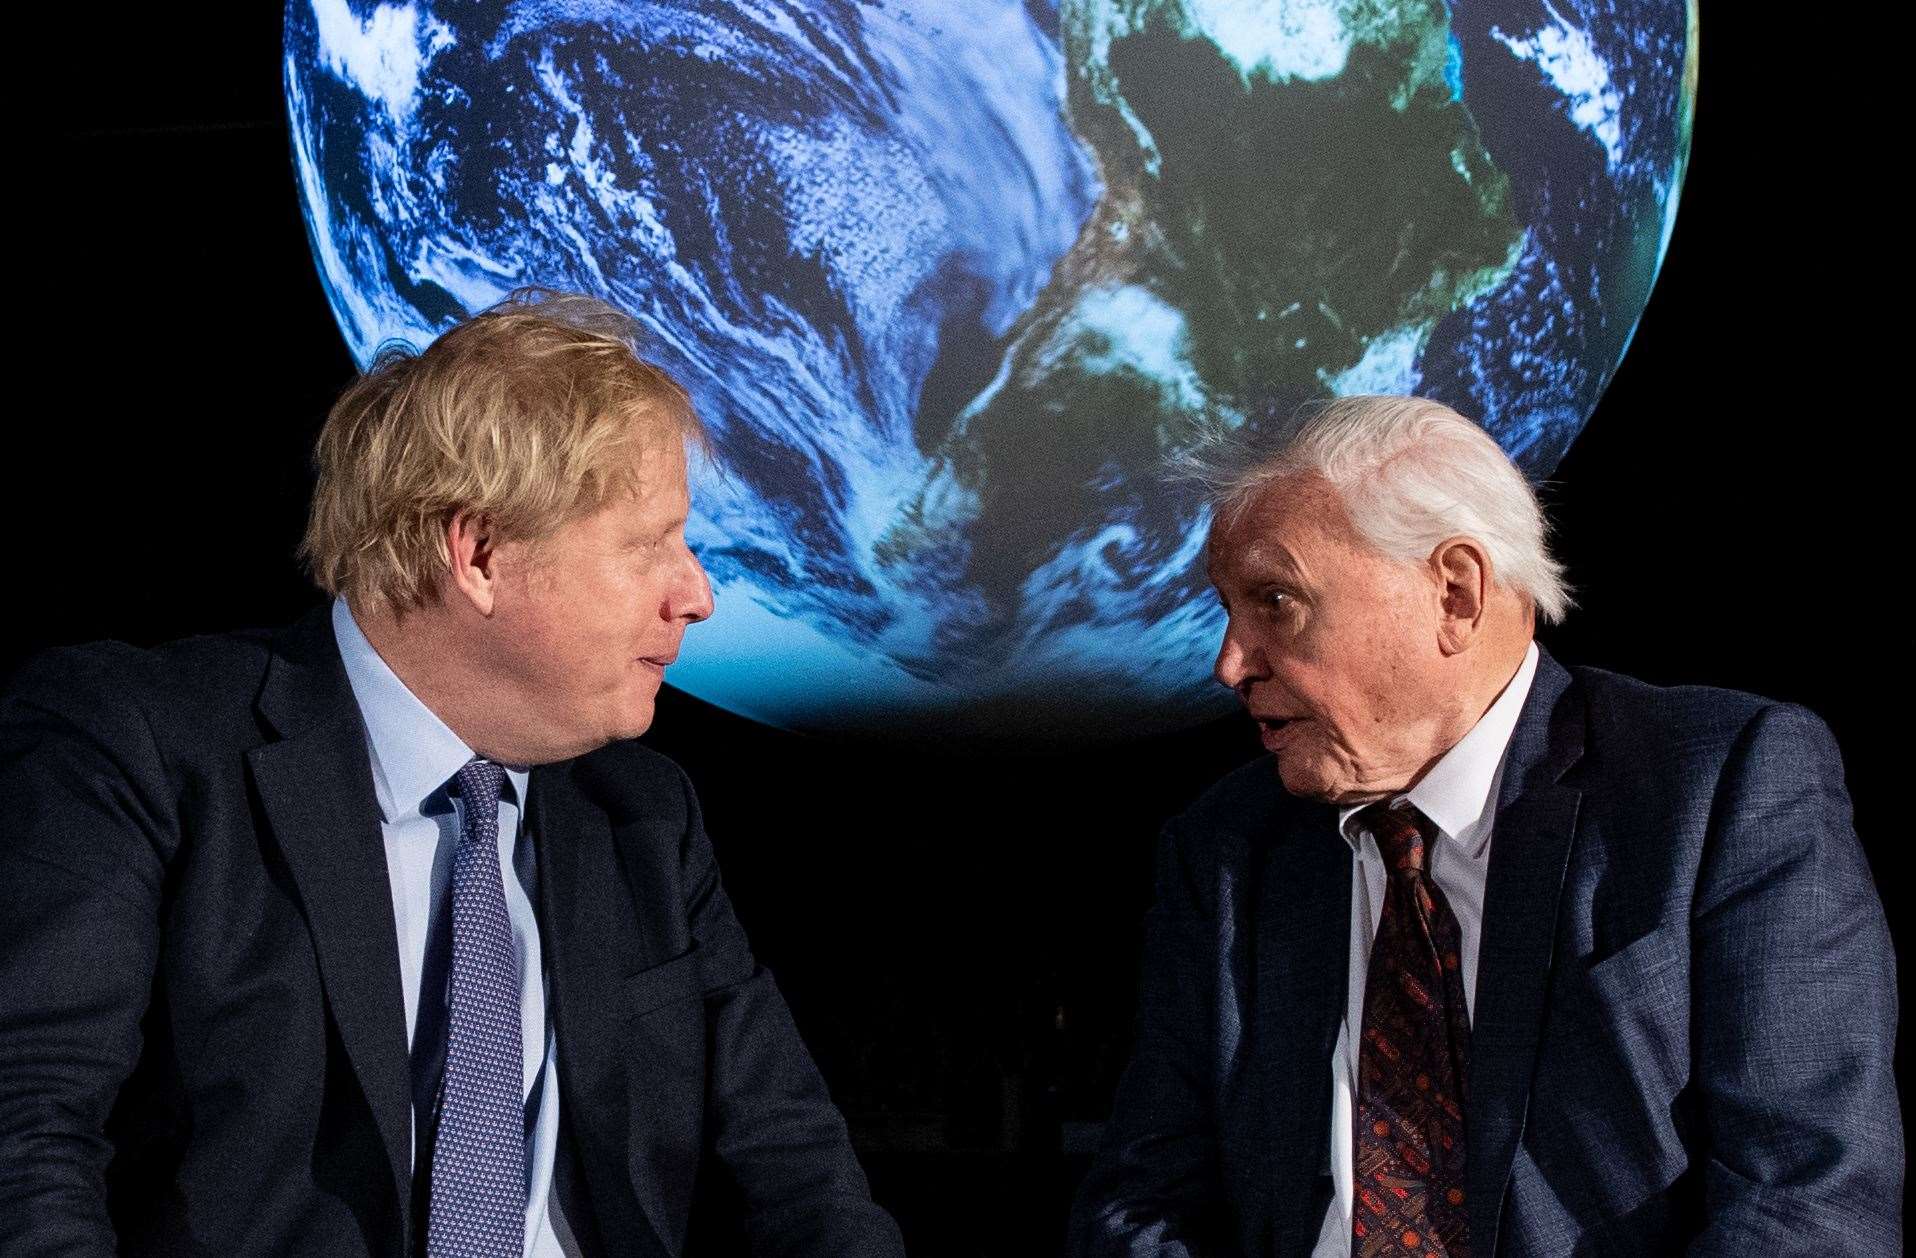 Prime Minister Boris Johnson and Sir David Attenborough both gave their backing to the report (Chris J Ratcliffe/PA)